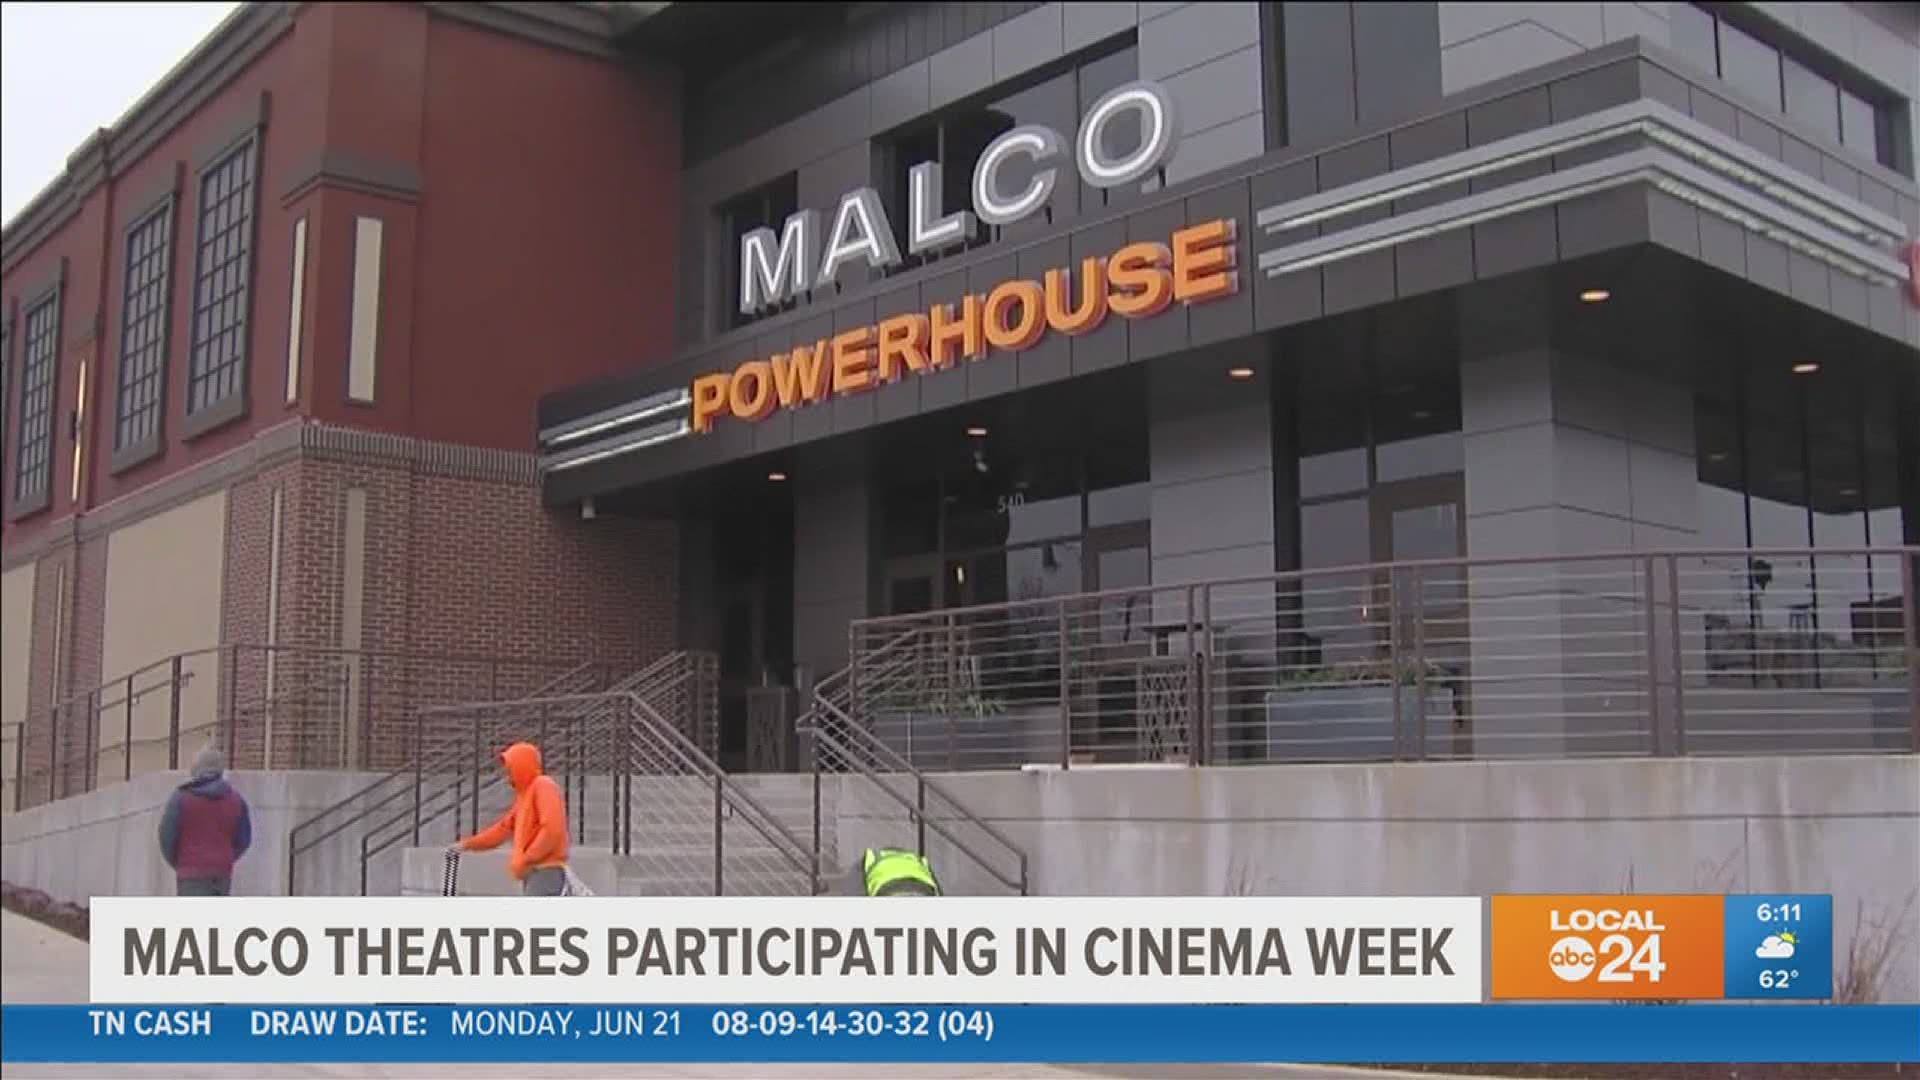 Malco Theatres will participate in the first Cinema Week with a deals and promotions to entice movie-going.